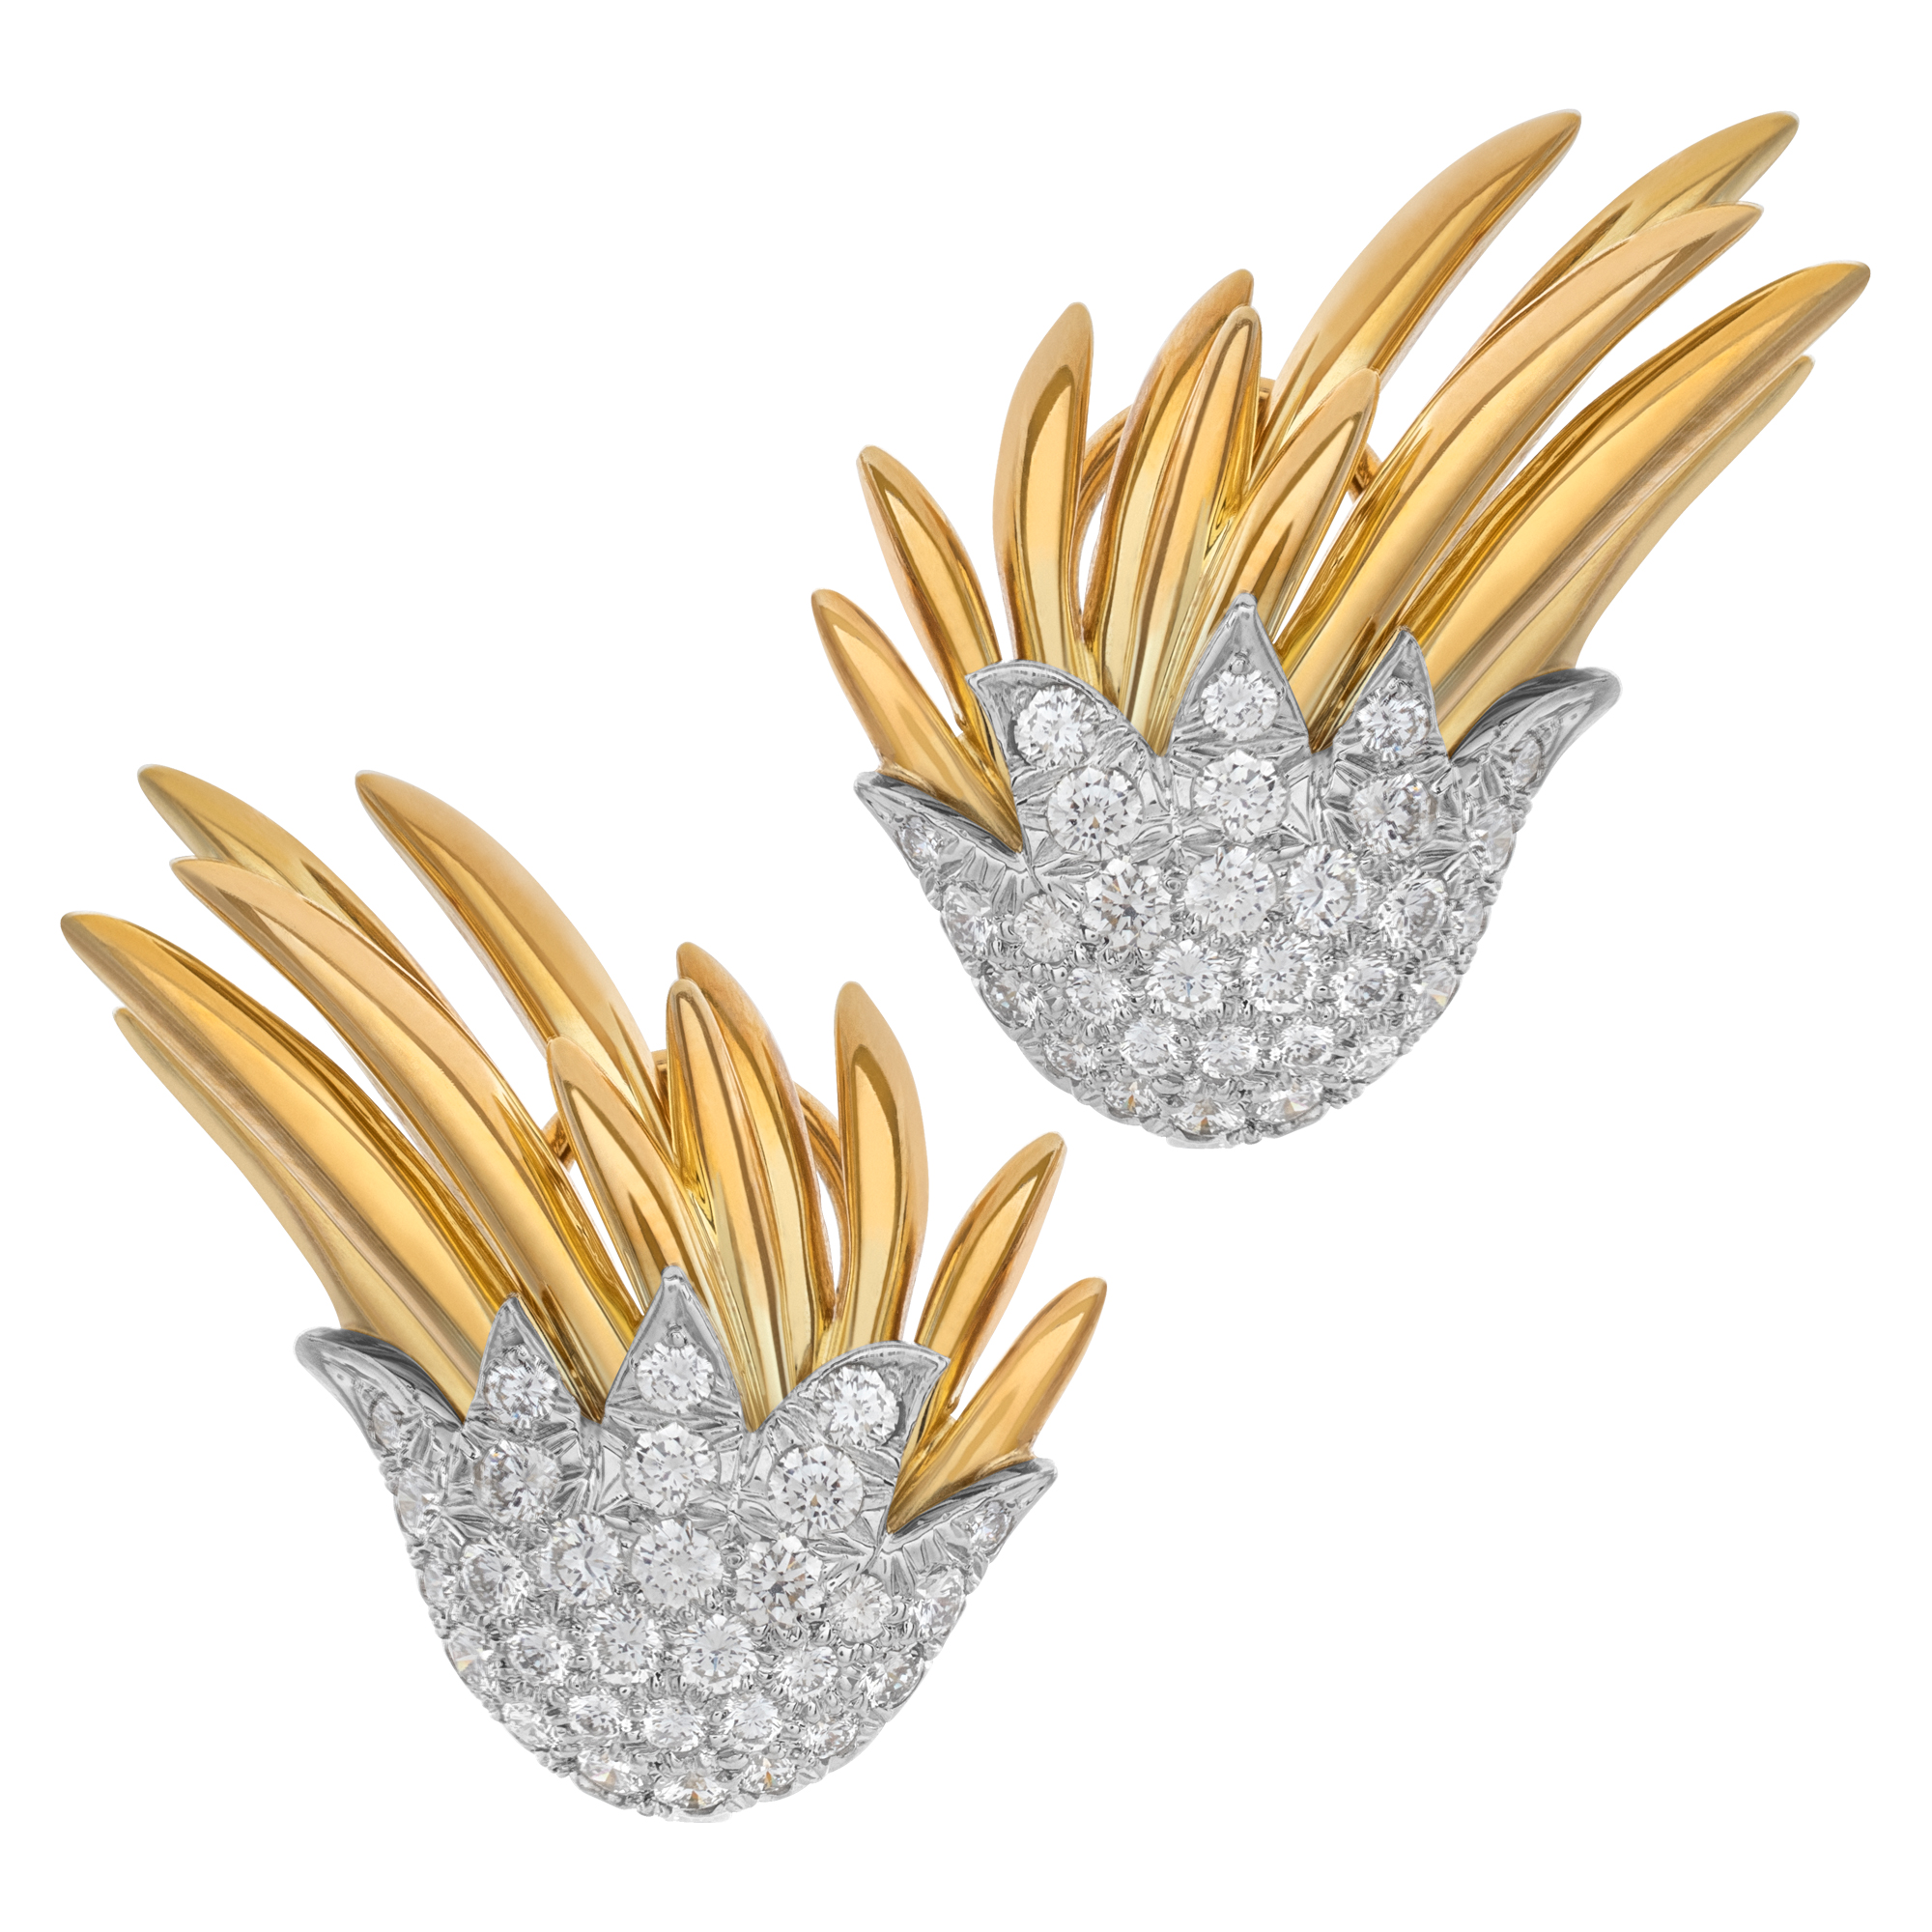 Tiffany & Co. Schlumberger "Flame" diamonds earrings in platinum and 18k yellow gold